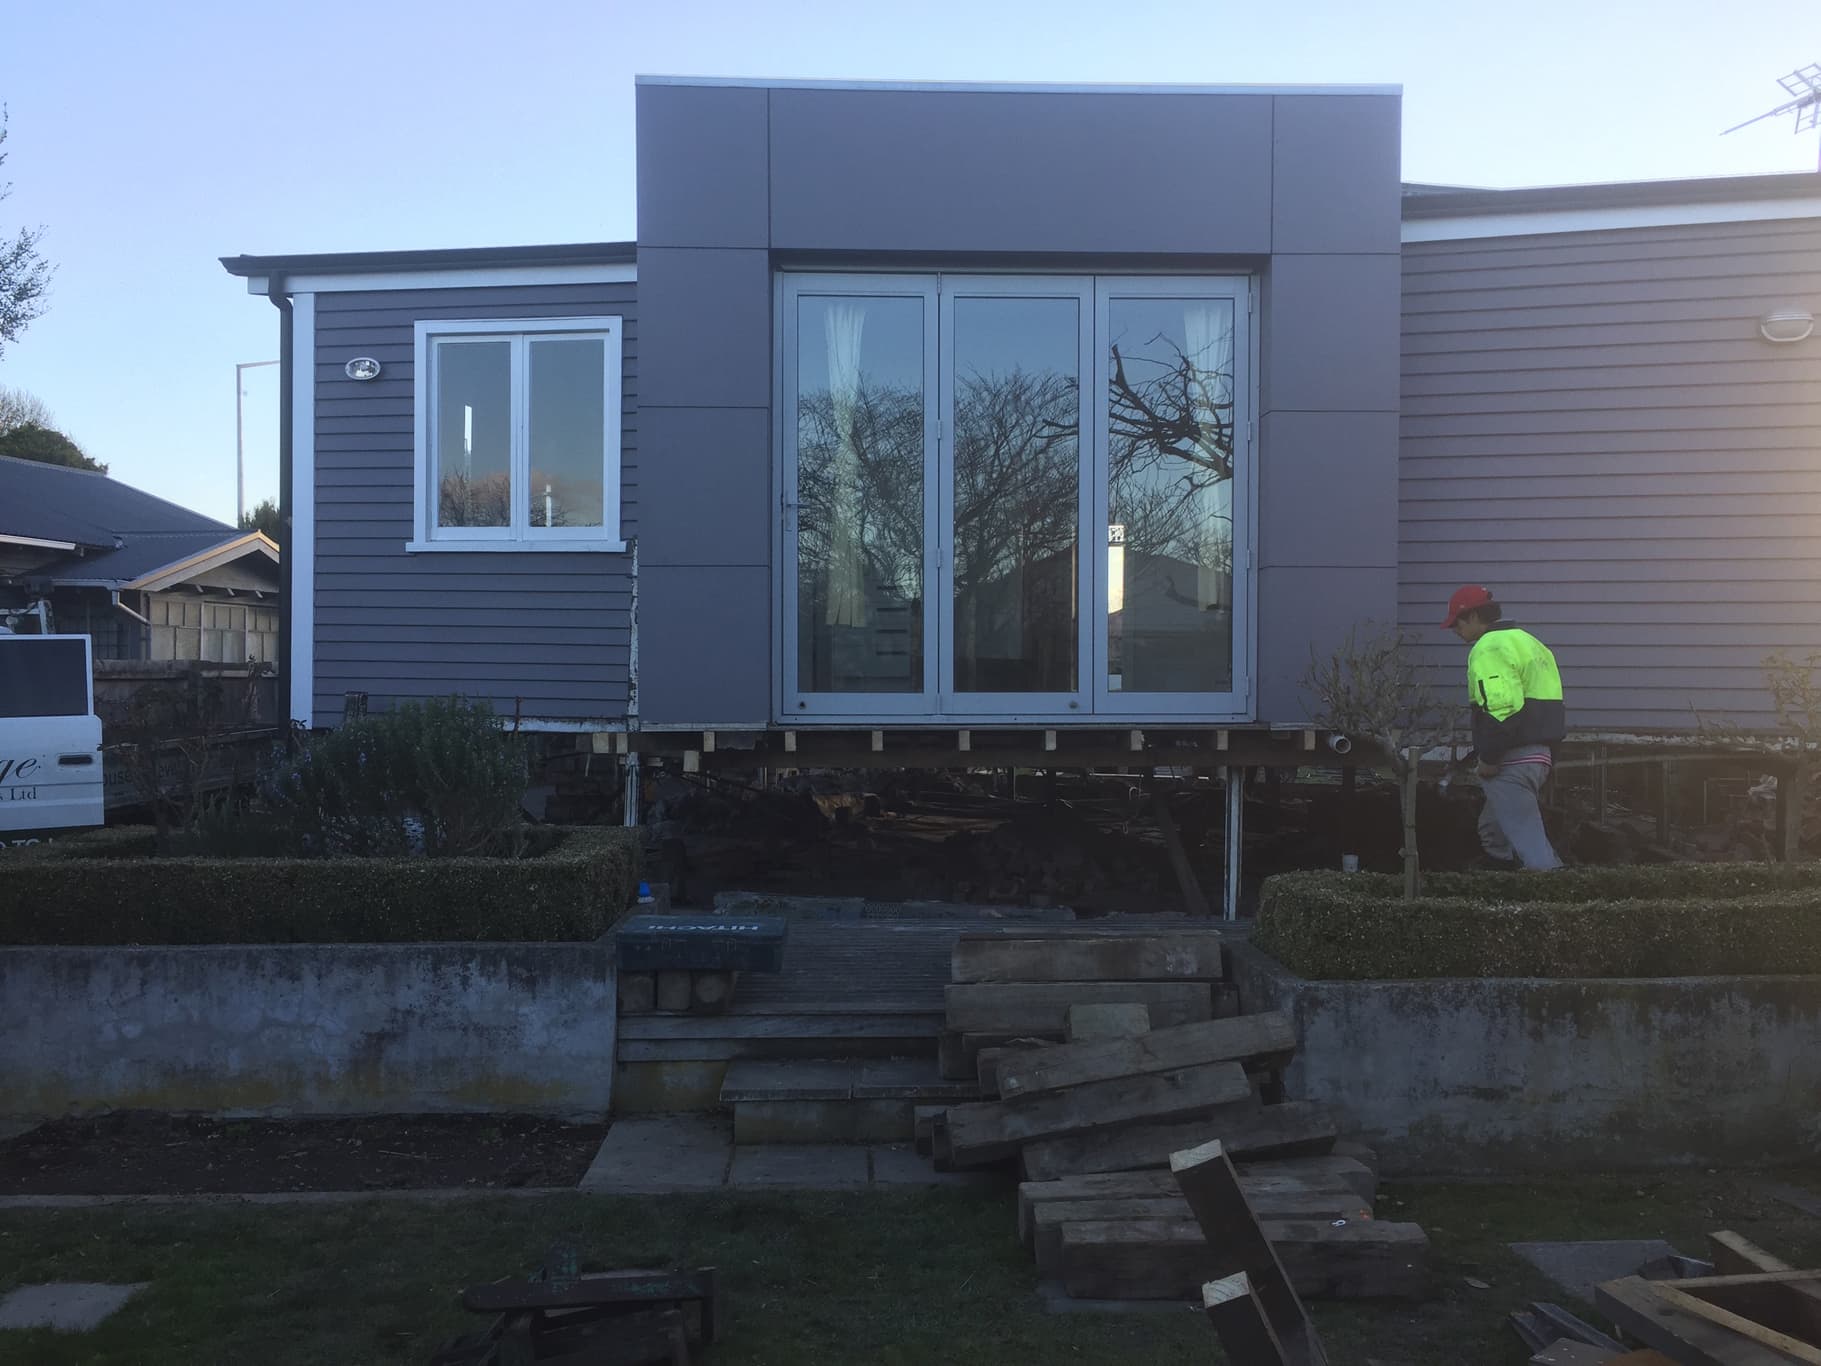 Foundation replacement performed by the Heritage House Relevellers team in Christchurch